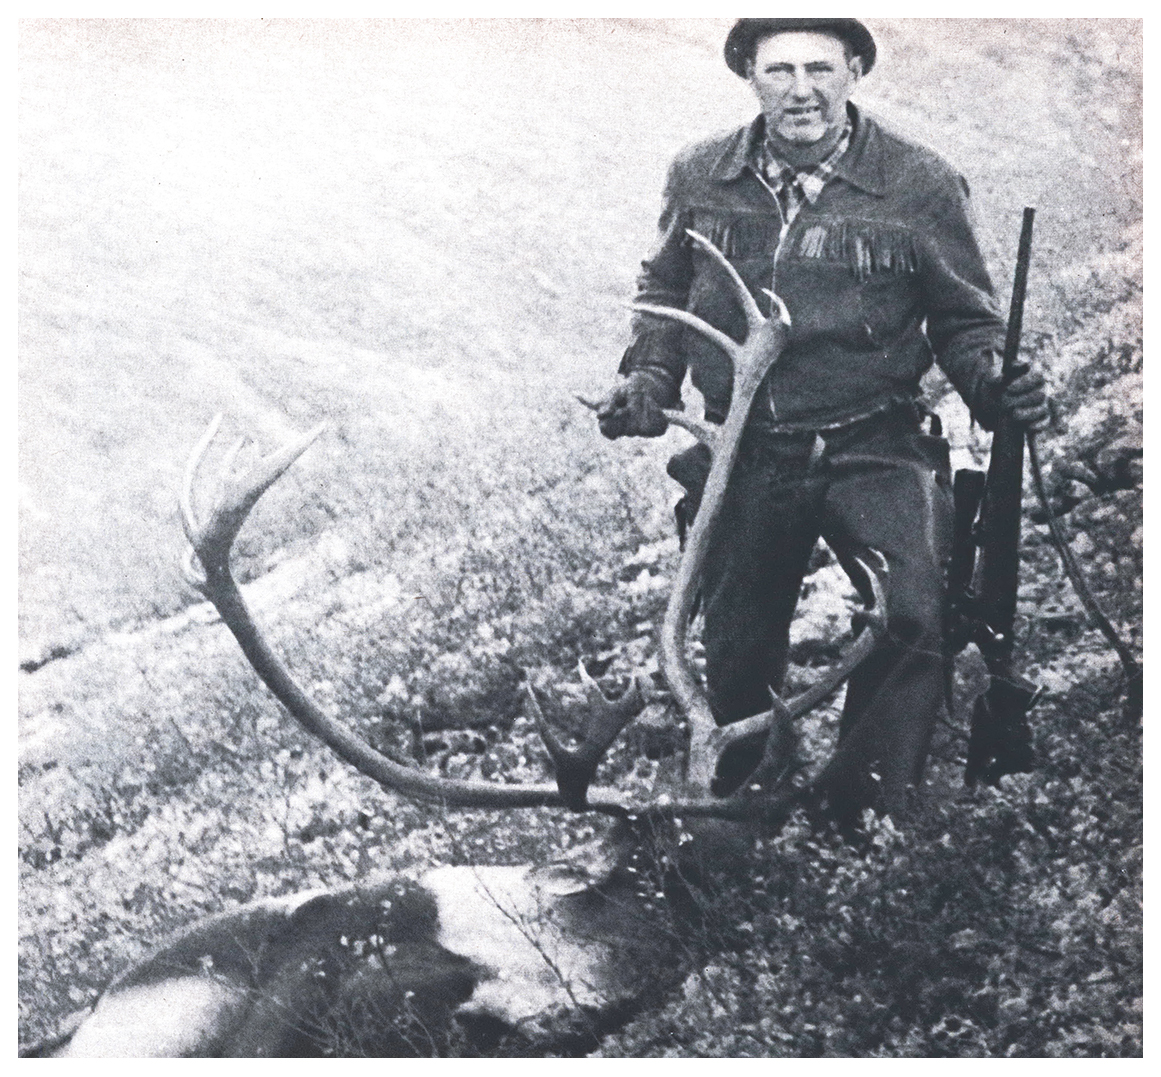 Hunt’s finale leaves the group 20 miles from camp, but Lou manages a grin as the author poses him with his second-chance caribou and rifle.